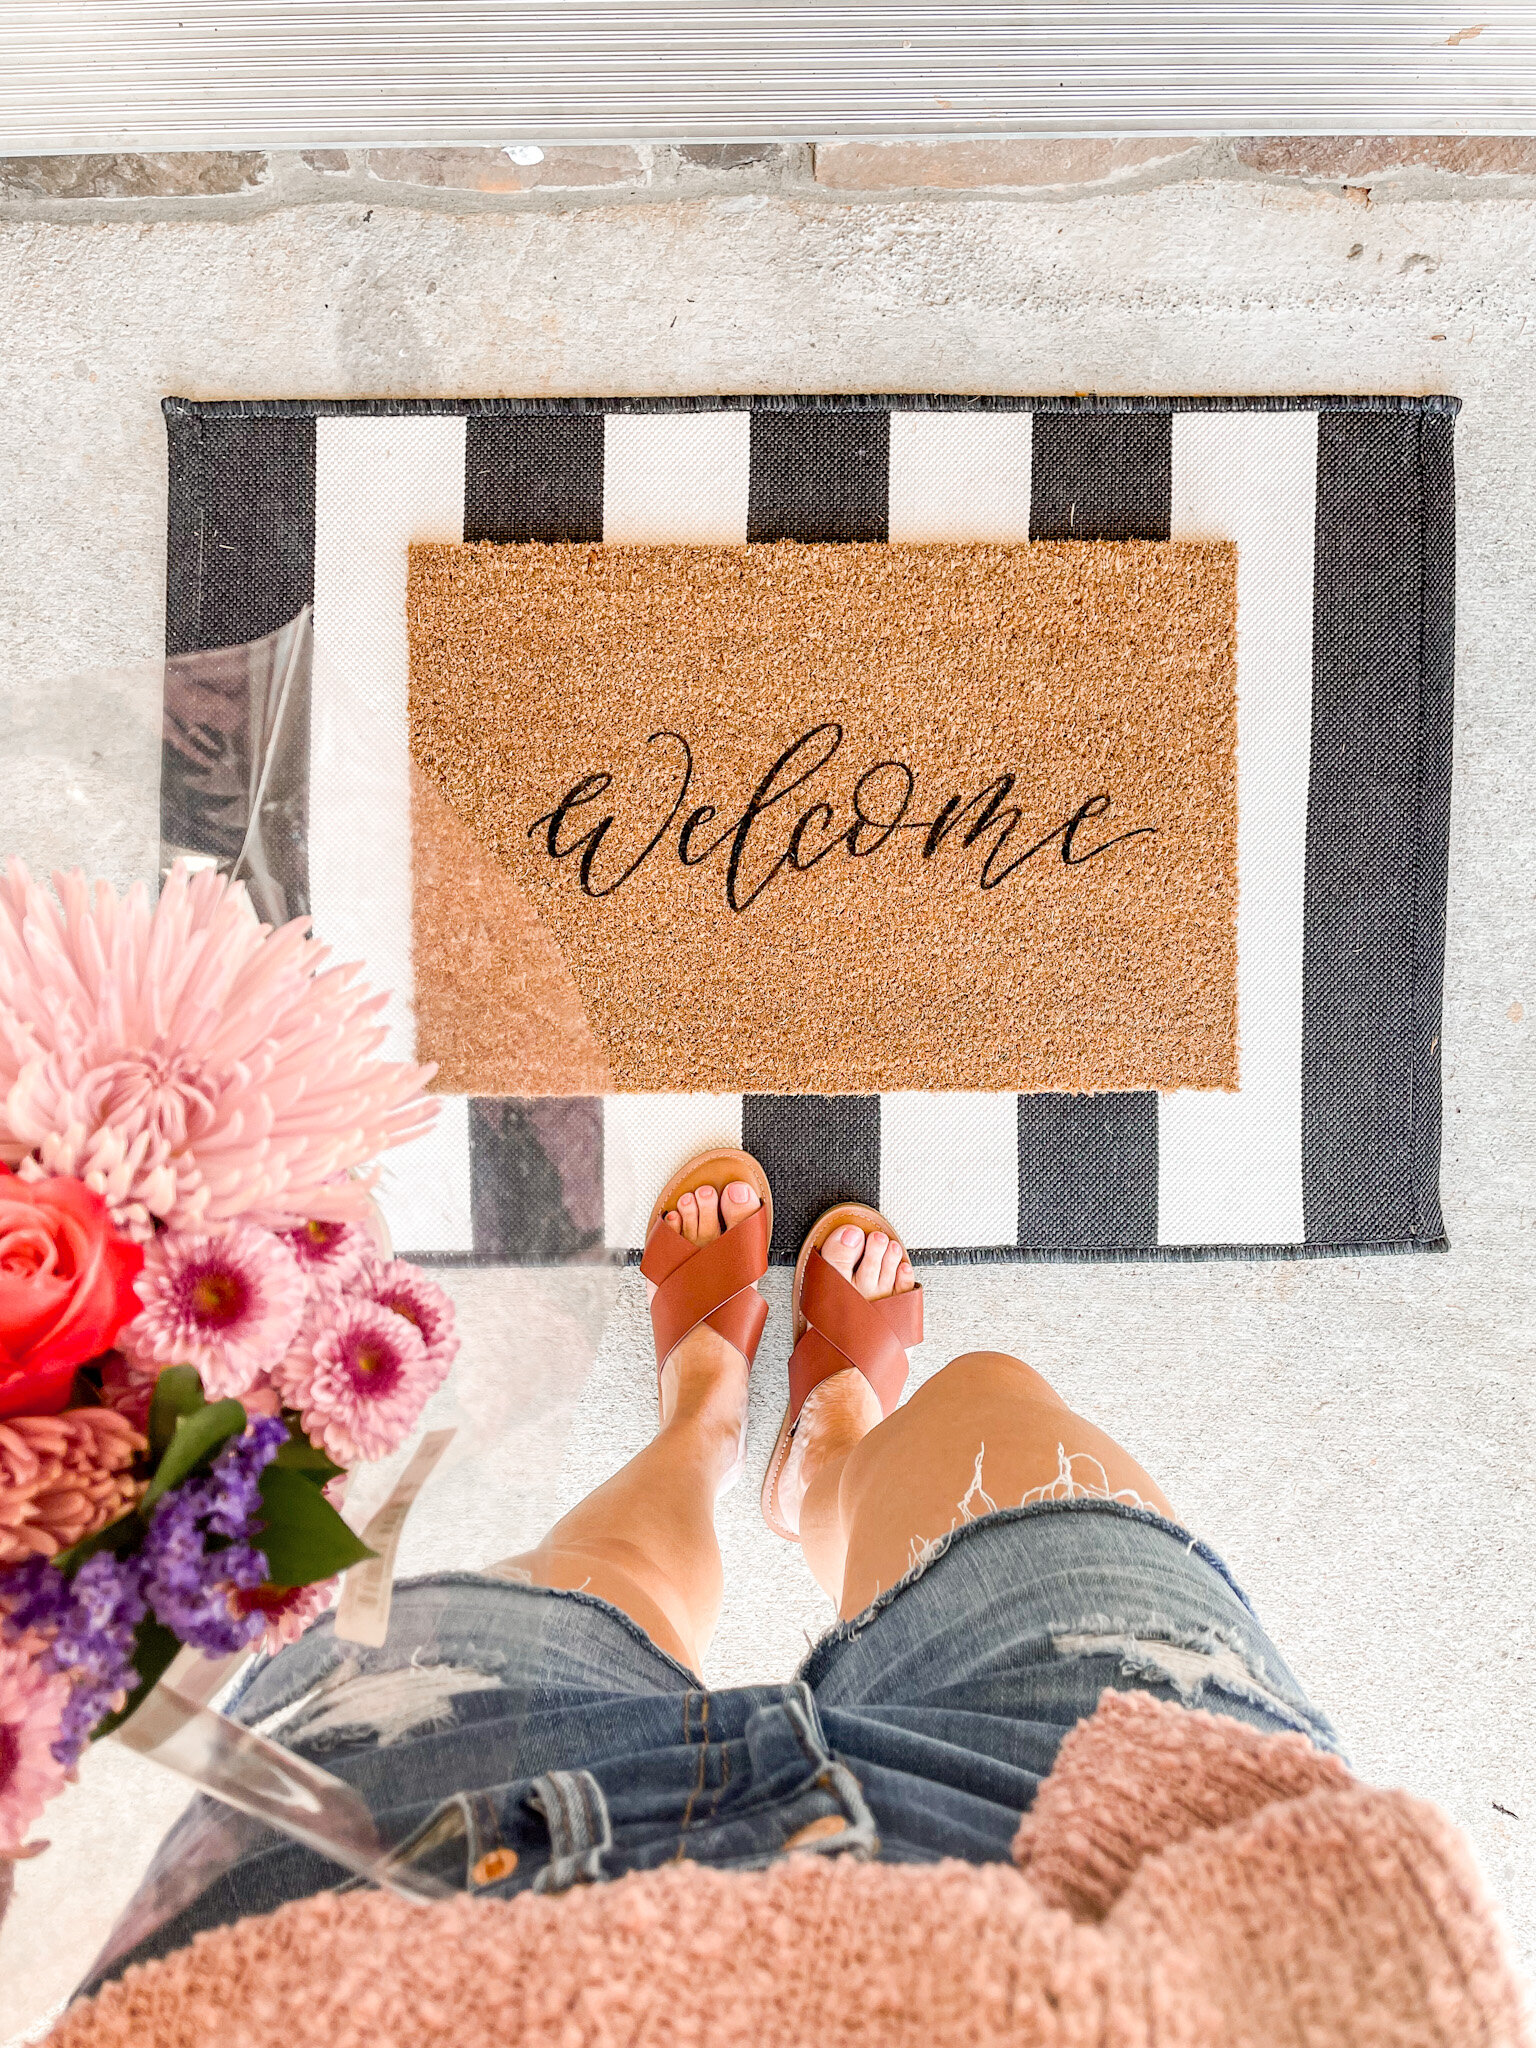 How to Make a Hand Painted Doormat Tutorial - Simply Made Fun